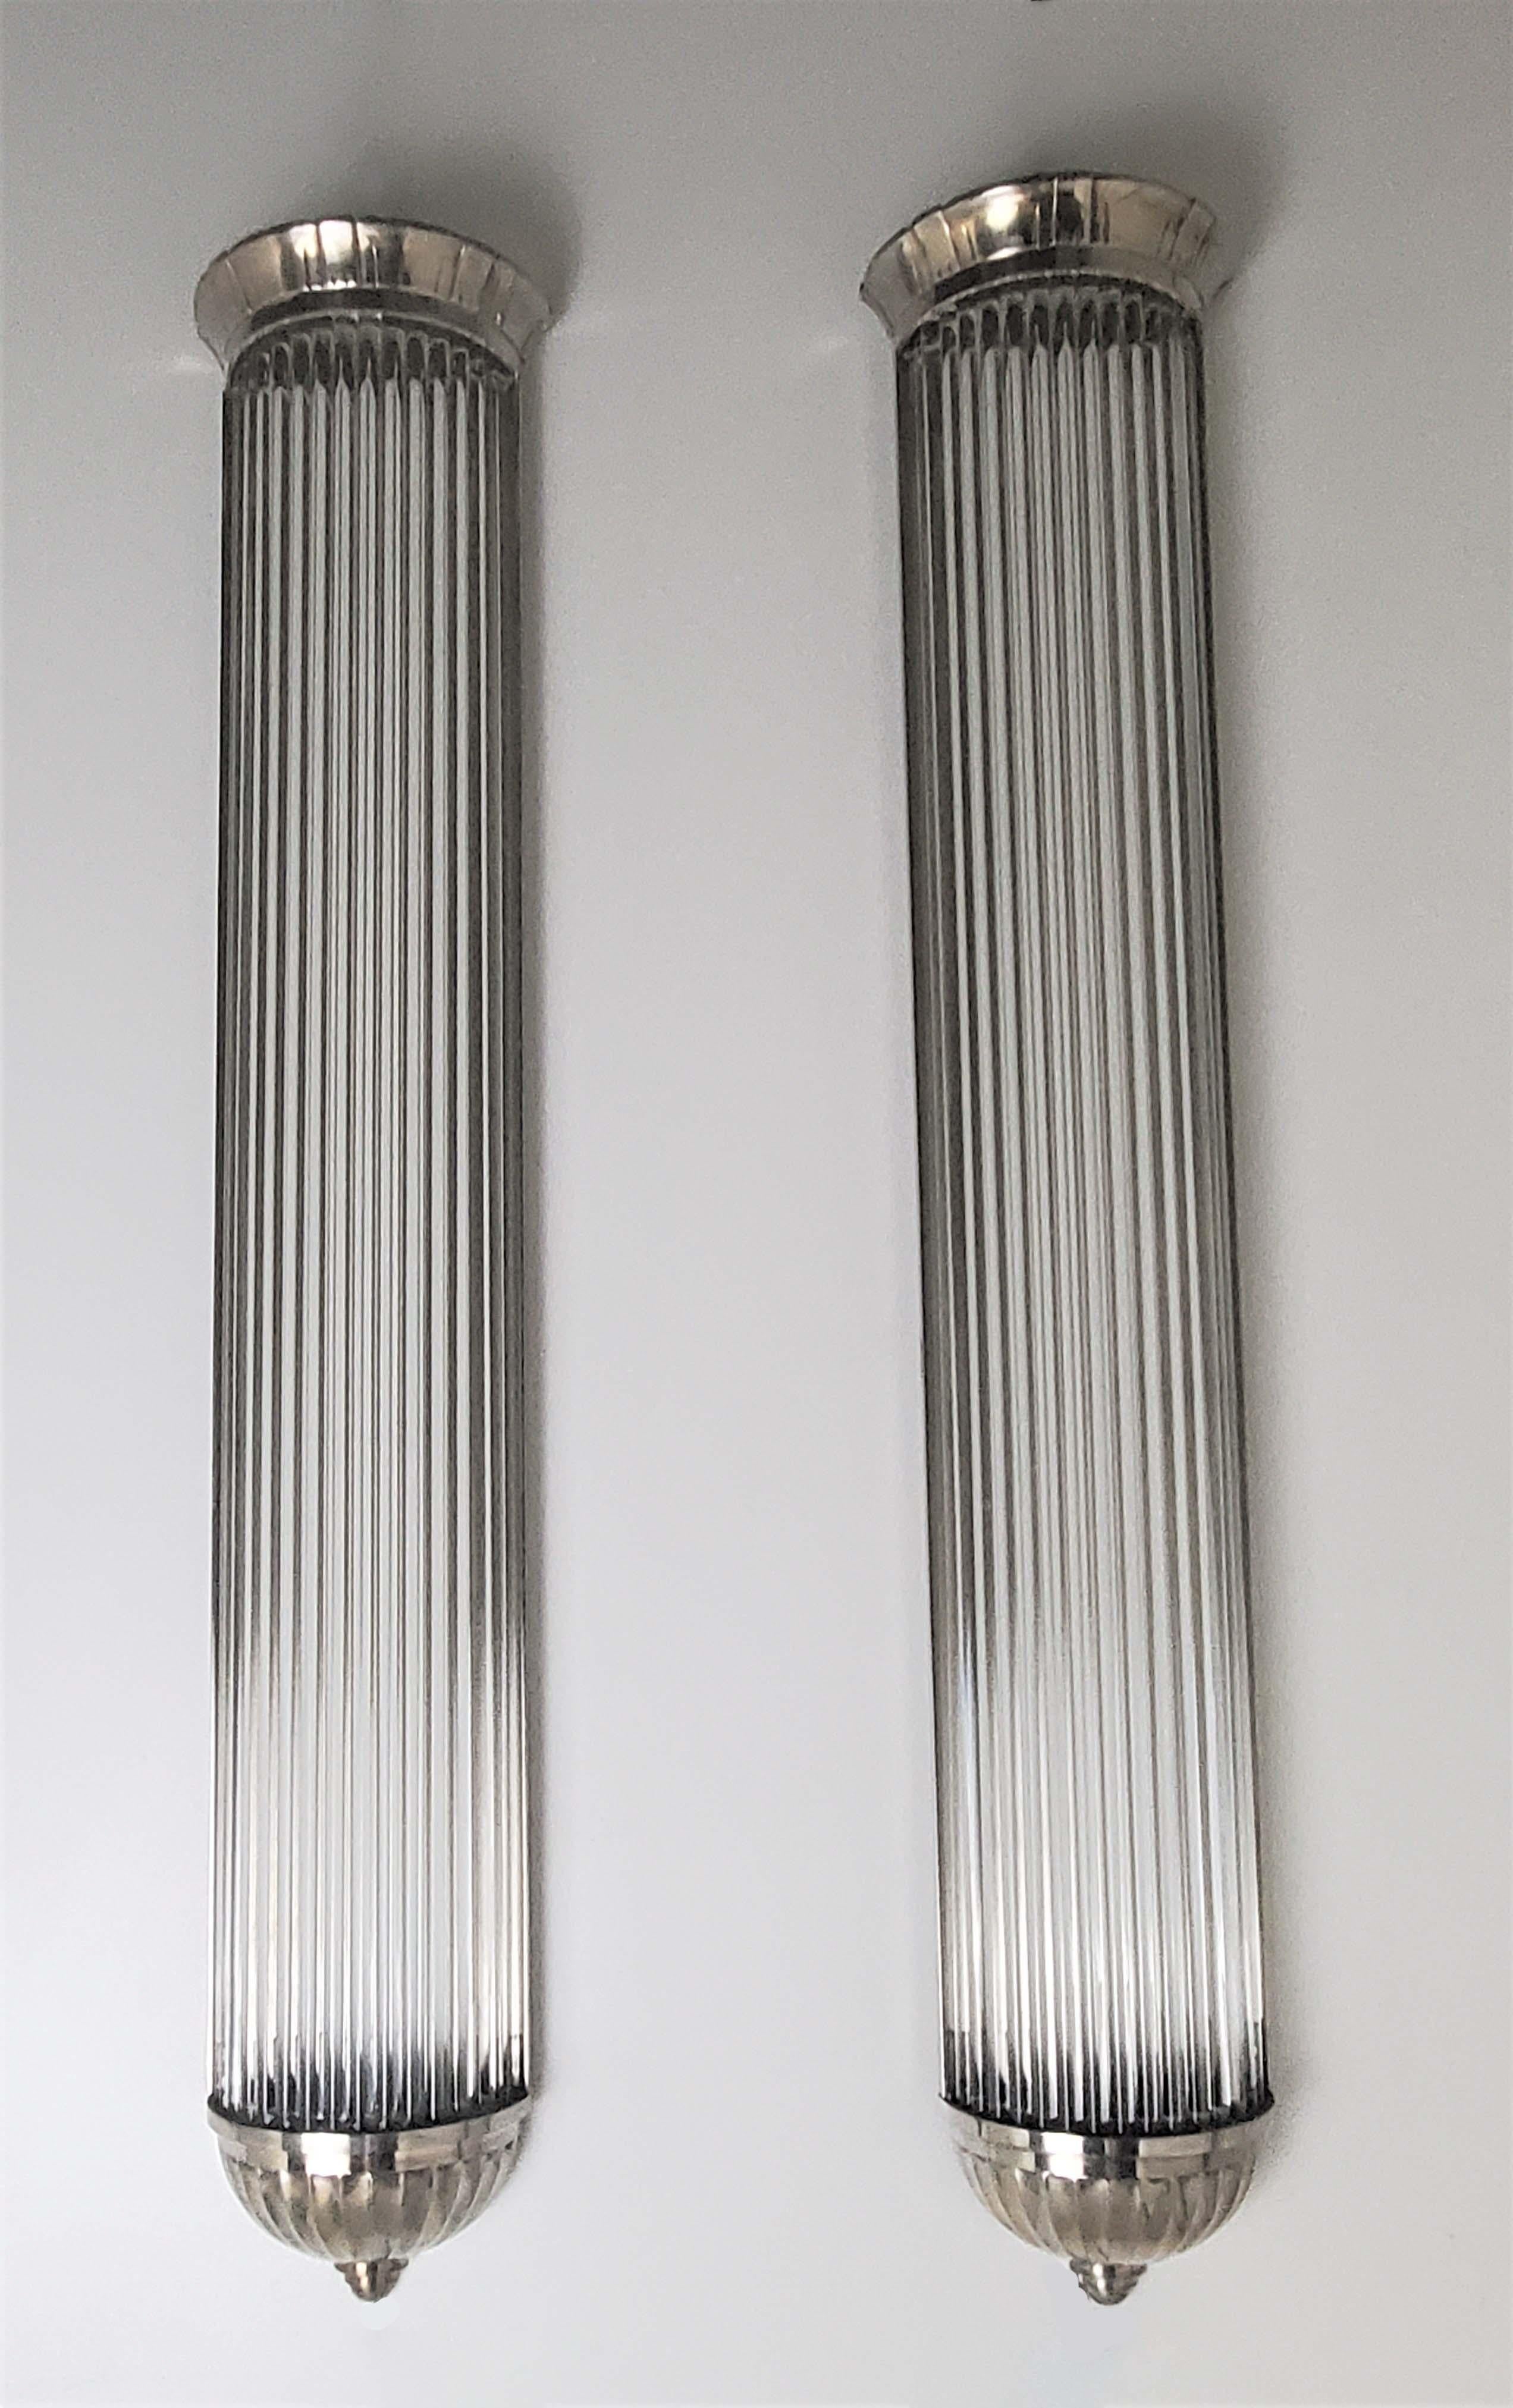 Monumental Pair of French Modernist Long Tubular Sconces by Petitot For Sale 5